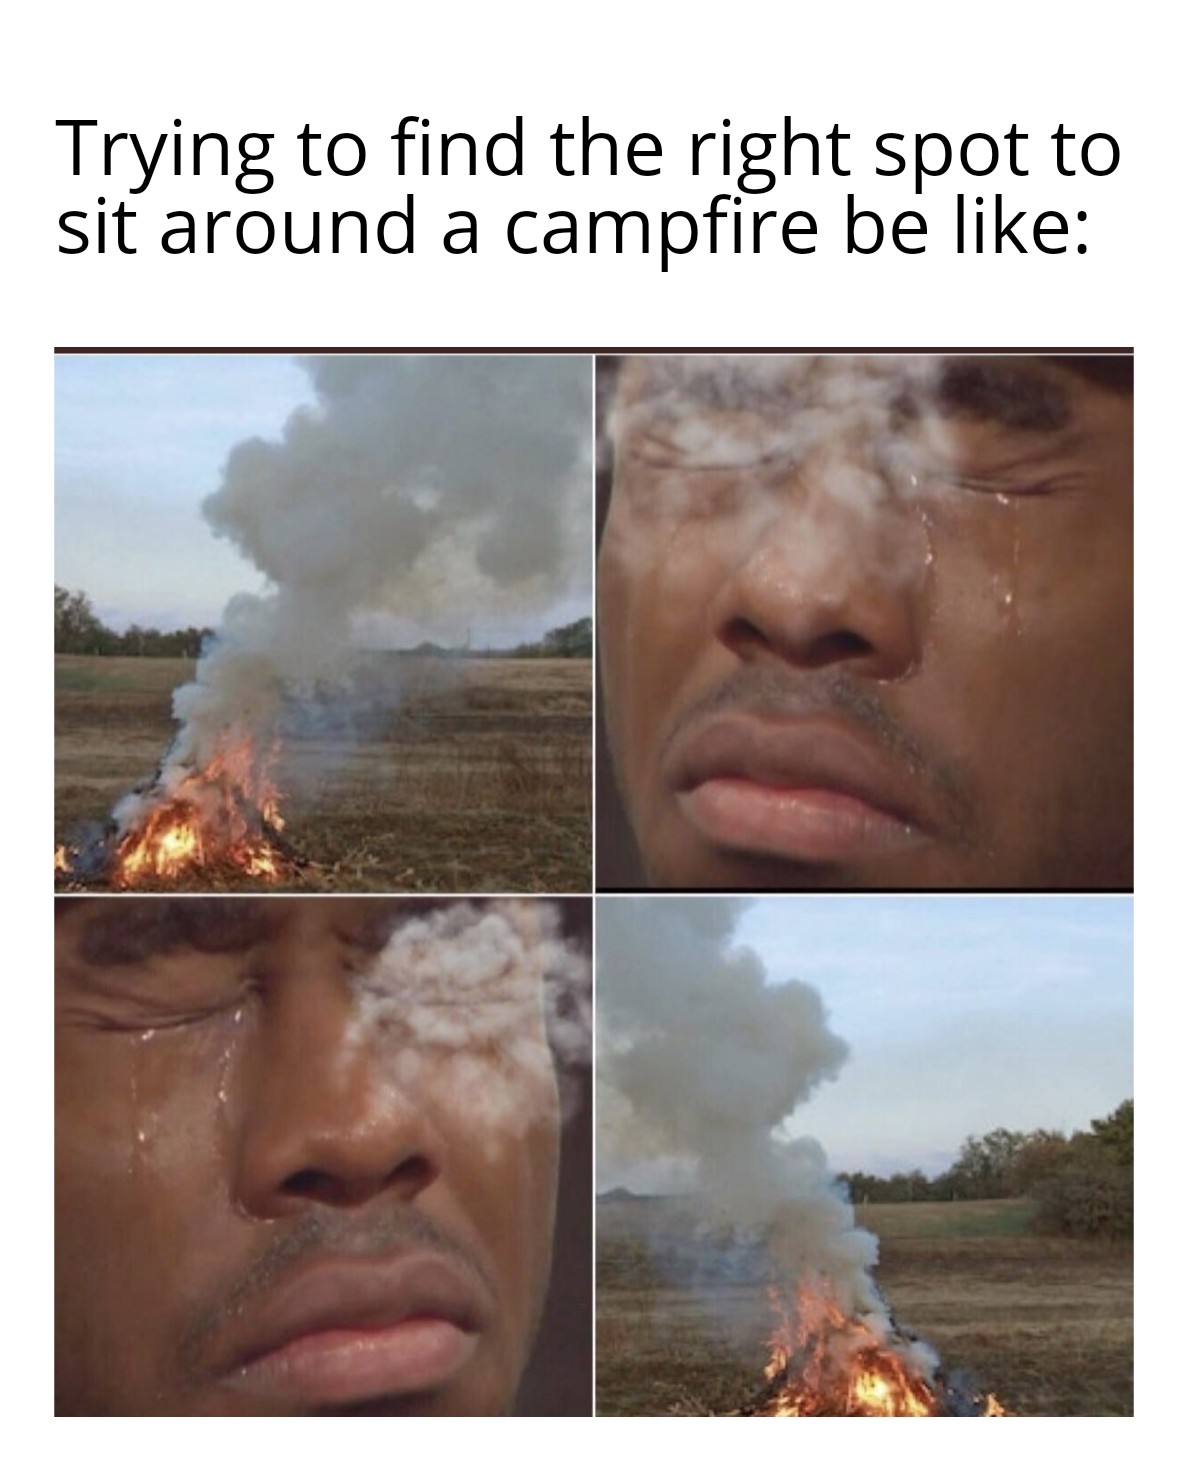 funny memes - dank memes - trying to find the right spot to sit around a campfire be like - Trying to find the right spot to sit around a campfire be a